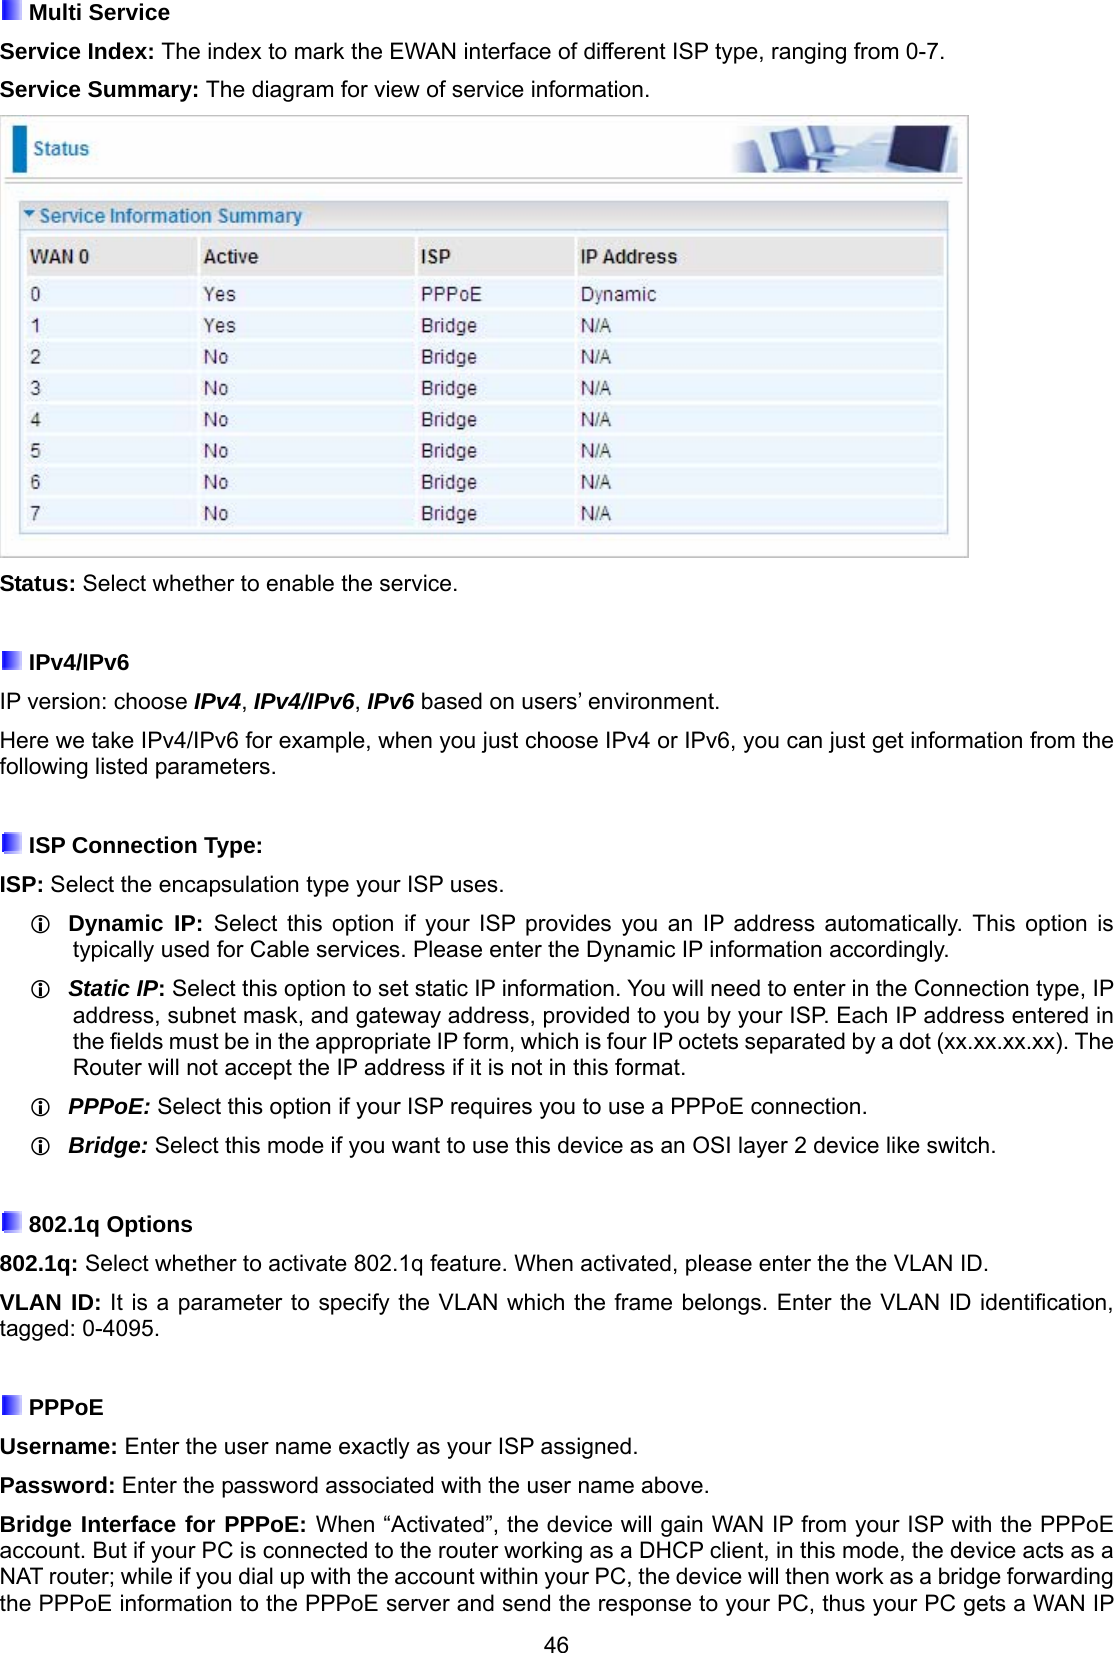 46  Multi Service  Service Index: The index to mark the EWAN interface of different ISP type, ranging from 0-7. Service Summary: The diagram for view of service information.  Status: Select whether to enable the service.   IPv4/IPv6 IP version: choose IPv4, IPv4/IPv6, IPv6 based on users’ environment. Here we take IPv4/IPv6 for example, when you just choose IPv4 or IPv6, you can just get information from the following listed parameters.   ISP Connection Type:  ISP: Select the encapsulation type your ISP uses.   Dynamic IP: Select this option if your ISP provides you an IP address automatically. This option is typically used for Cable services. Please enter the Dynamic IP information accordingly.  Static IP: Select this option to set static IP information. You will need to enter in the Connection type, IP address, subnet mask, and gateway address, provided to you by your ISP. Each IP address entered in the fields must be in the appropriate IP form, which is four IP octets separated by a dot (xx.xx.xx.xx). The Router will not accept the IP address if it is not in this format.  PPPoE: Select this option if your ISP requires you to use a PPPoE connection.   Bridge: Select this mode if you want to use this device as an OSI layer 2 device like switch.   802.1q Options 802.1q: Select whether to activate 802.1q feature. When activated, please enter the the VLAN ID. VLAN ID: It is a parameter to specify the VLAN which the frame belongs. Enter the VLAN ID identification, tagged: 0-4095.   PPPoE Username: Enter the user name exactly as your ISP assigned.  Password: Enter the password associated with the user name above. Bridge Interface for PPPoE: When “Activated”, the device will gain WAN IP from your ISP with the PPPoE account. But if your PC is connected to the router working as a DHCP client, in this mode, the device acts as a NAT router; while if you dial up with the account within your PC, the device will then work as a bridge forwarding the PPPoE information to the PPPoE server and send the response to your PC, thus your PC gets a WAN IP 